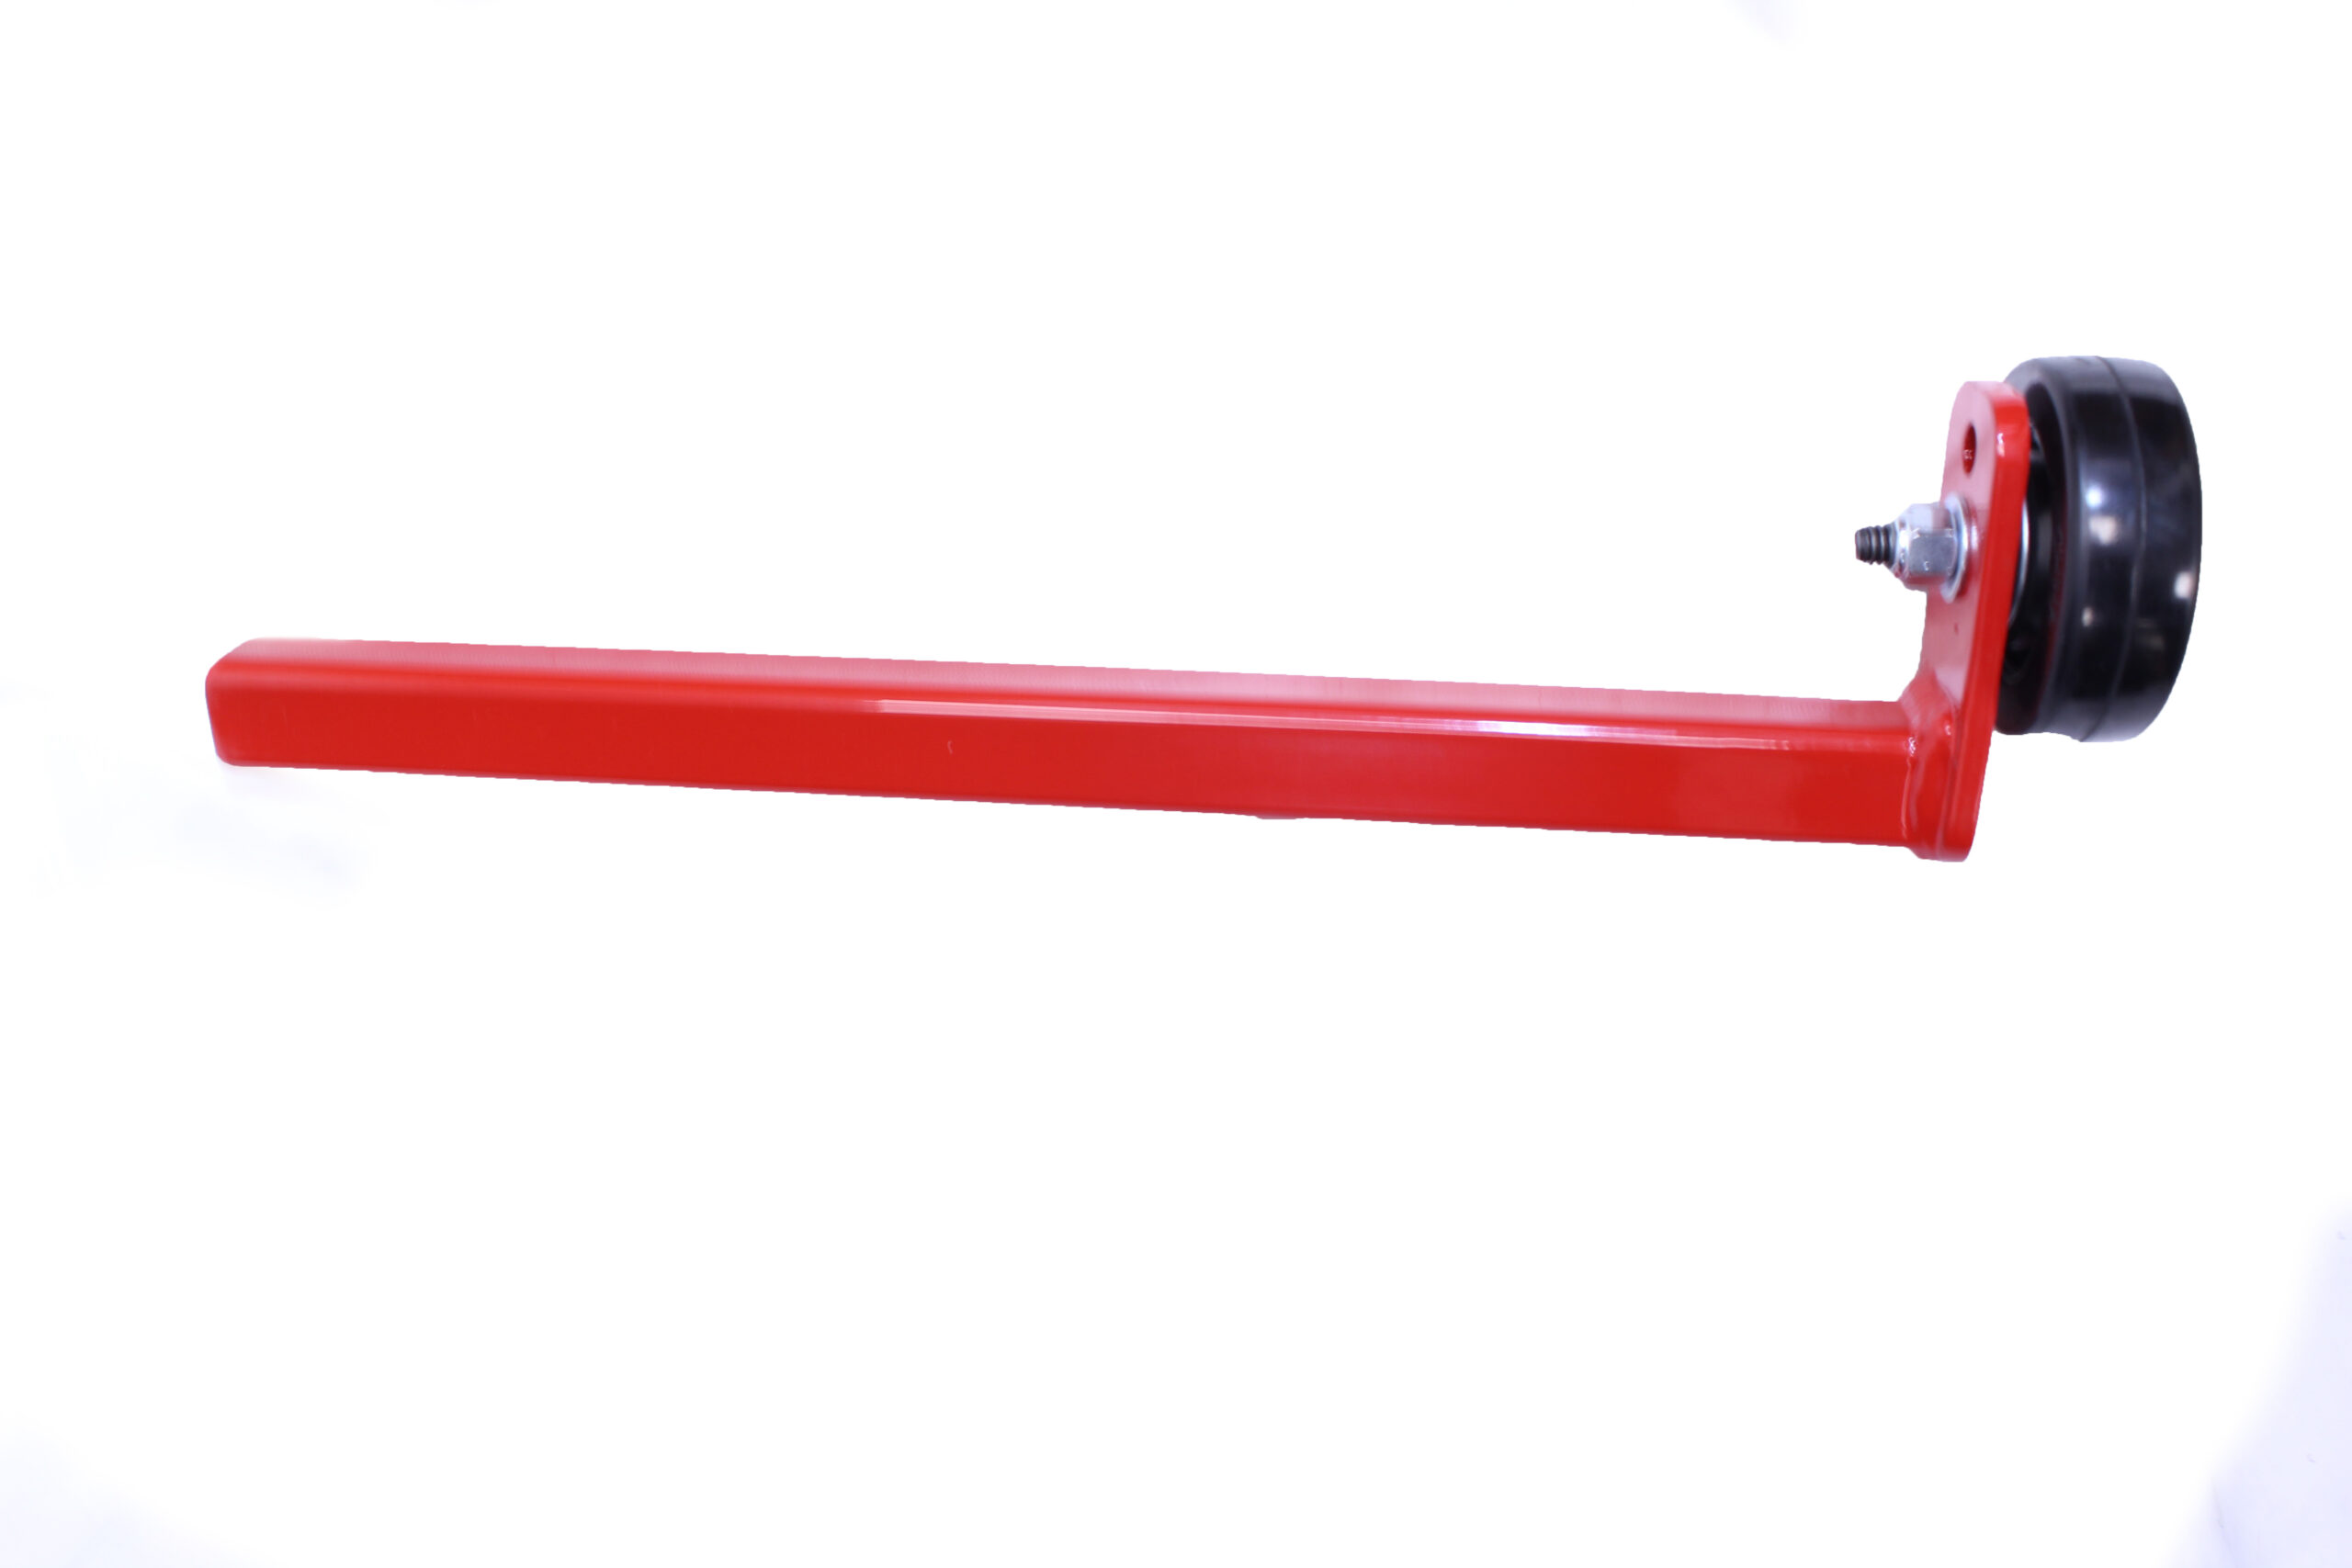 203-API-Red — 203 Axle (E203 drain pan axle)
(Wheels Sold Separately)